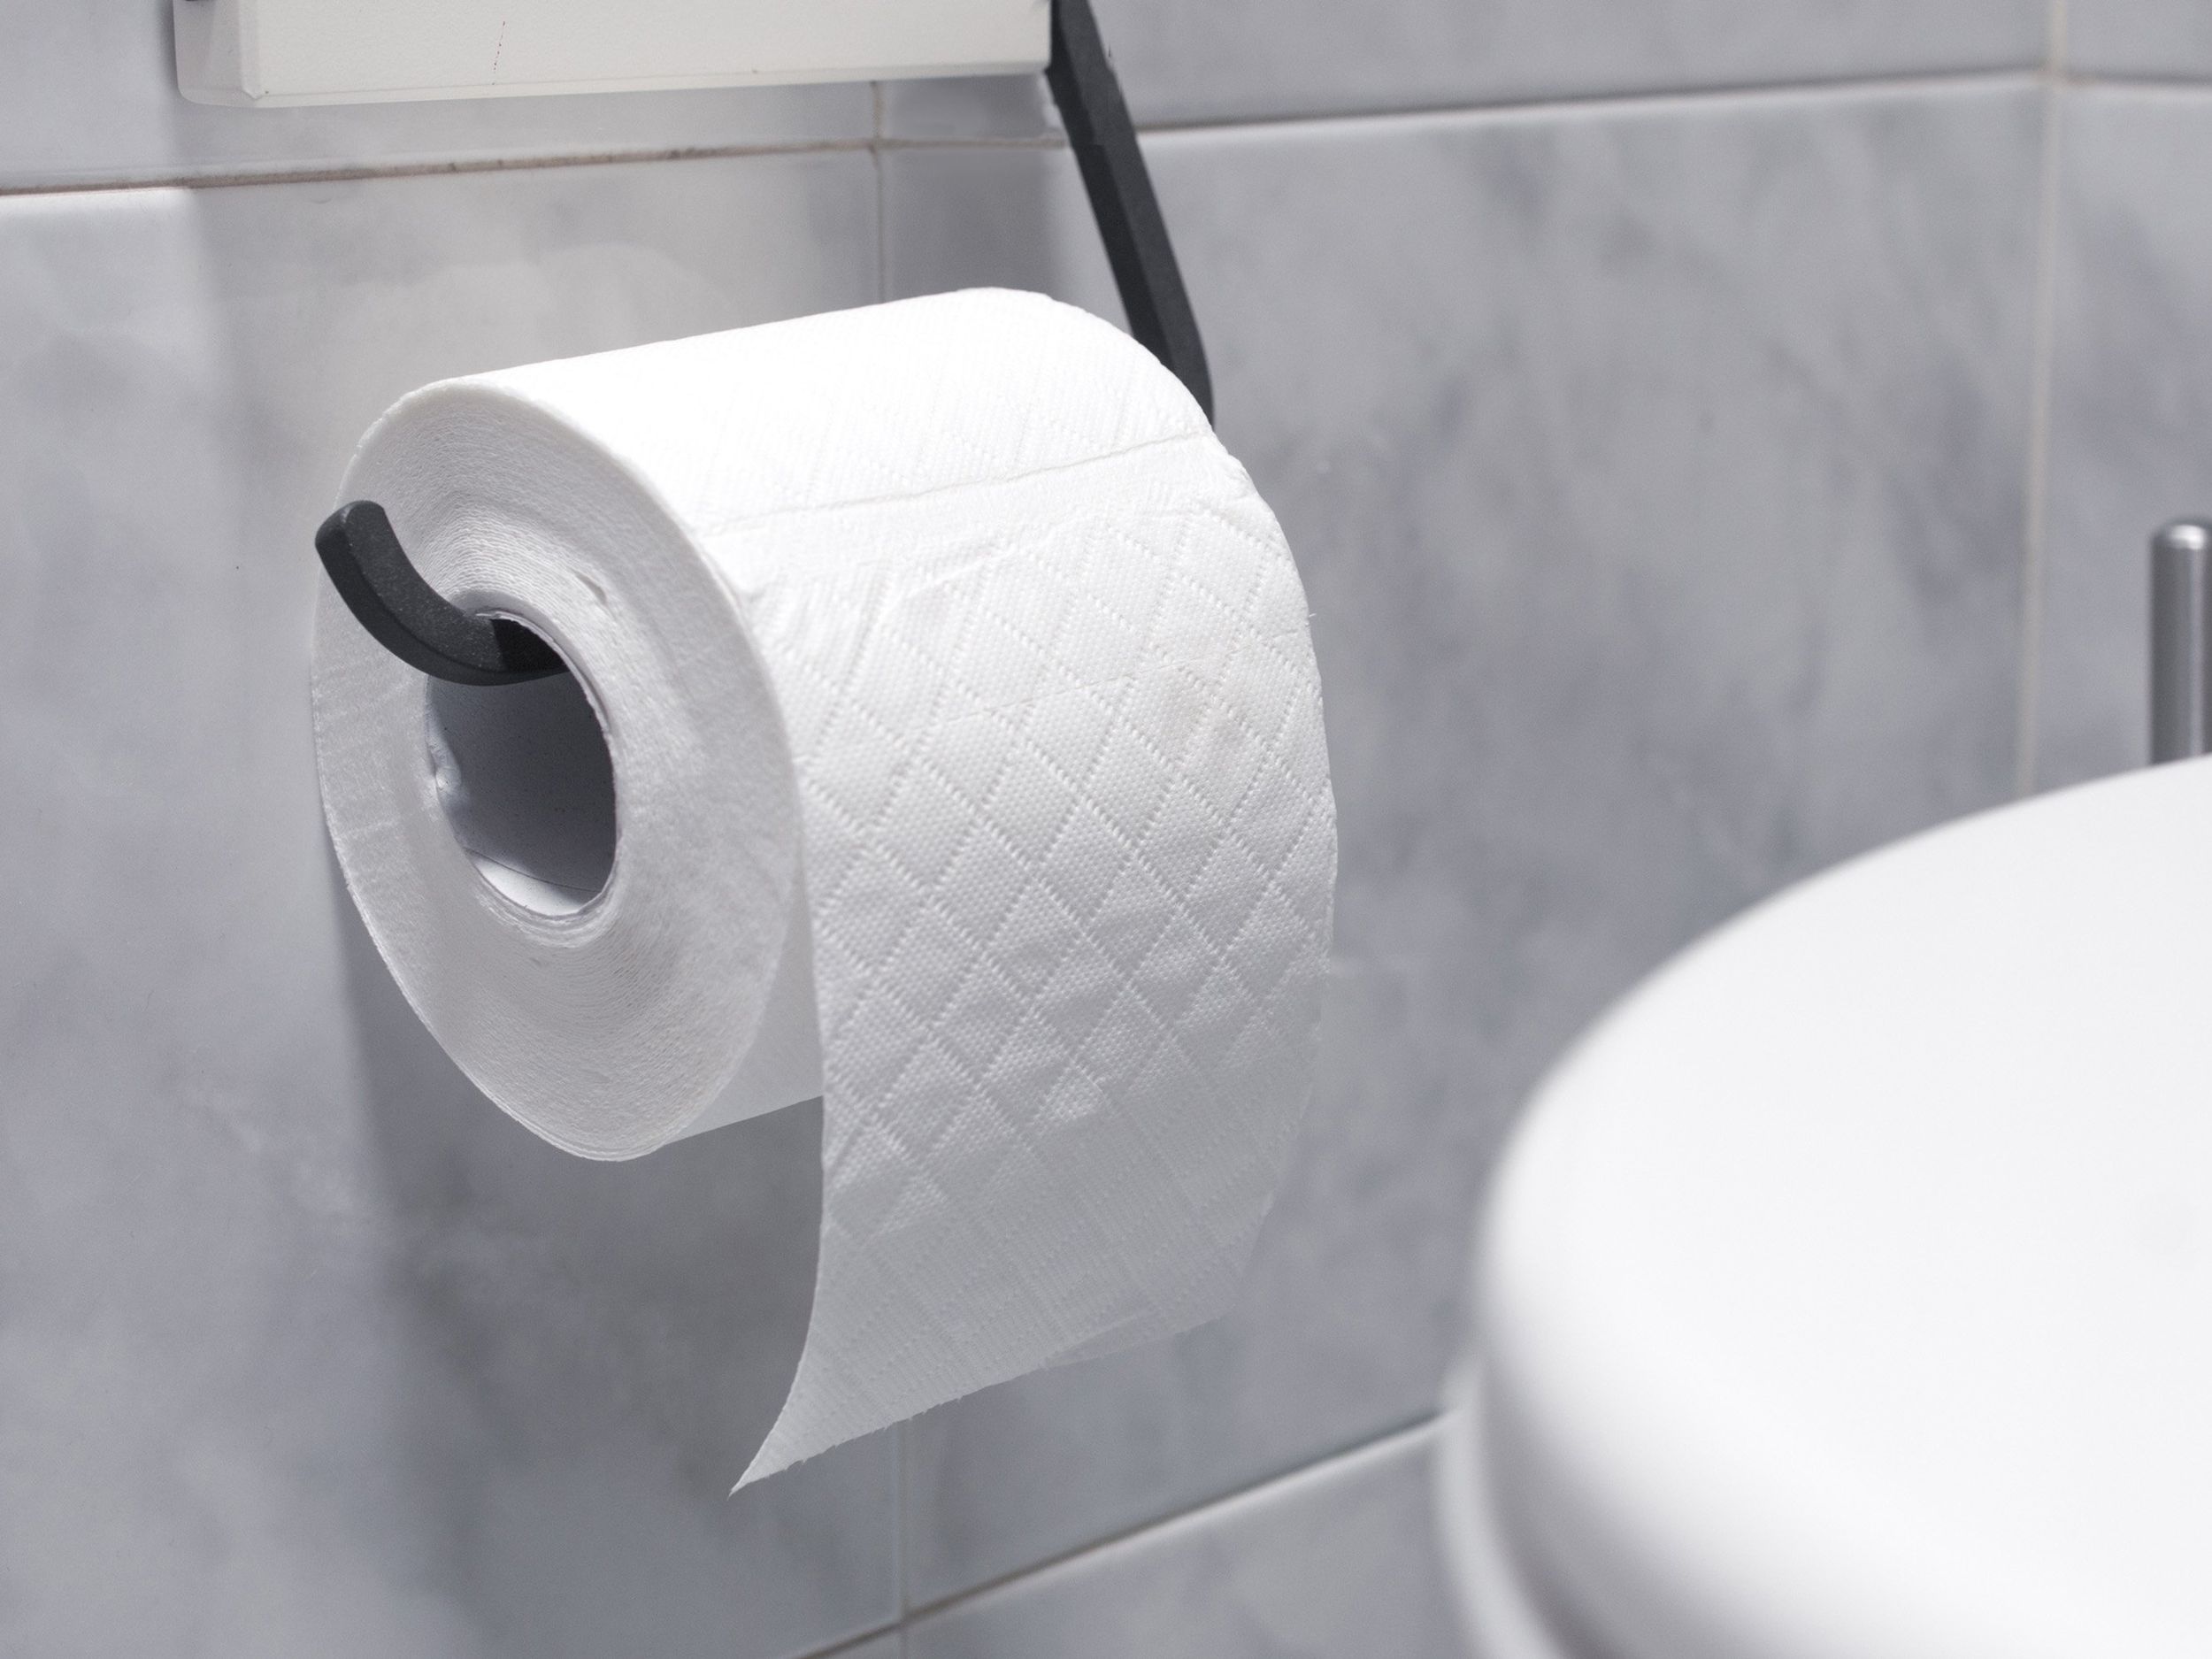 Toilet Paper Roll Size in U.S. 'Steadily Shrinking